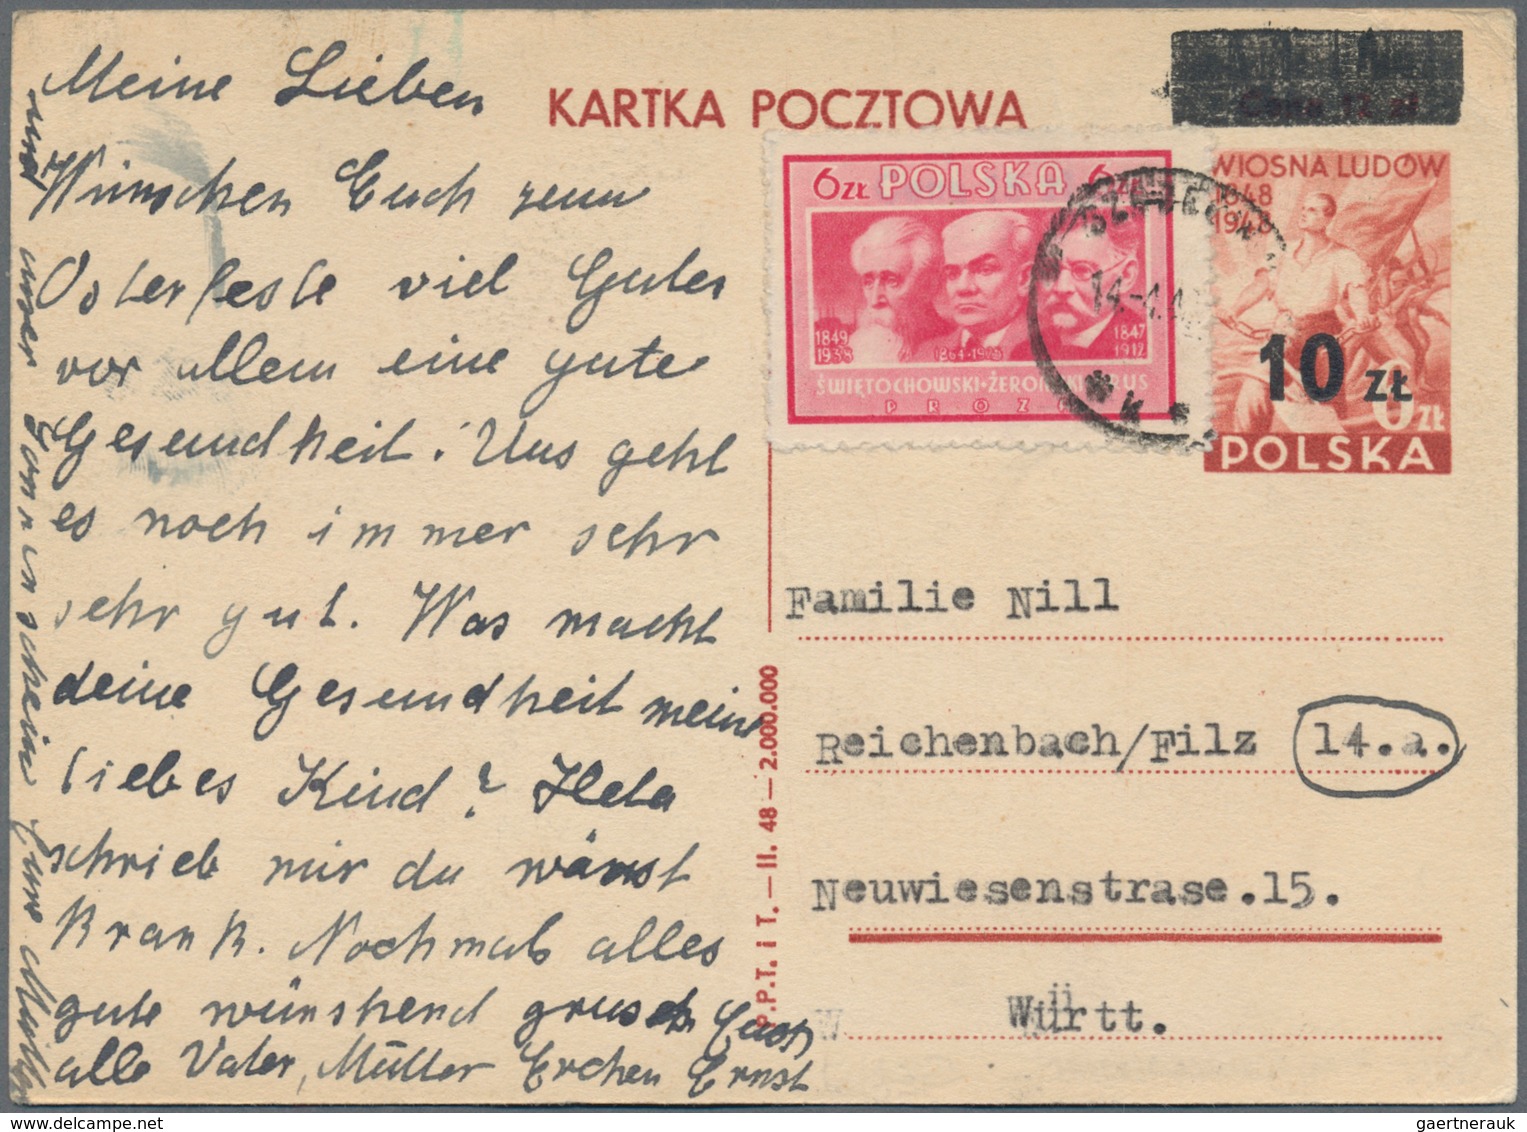 Polen: 1918/2005 (ca.) holding of ca. 590 cards, letters, postal stationary (better picture postcard